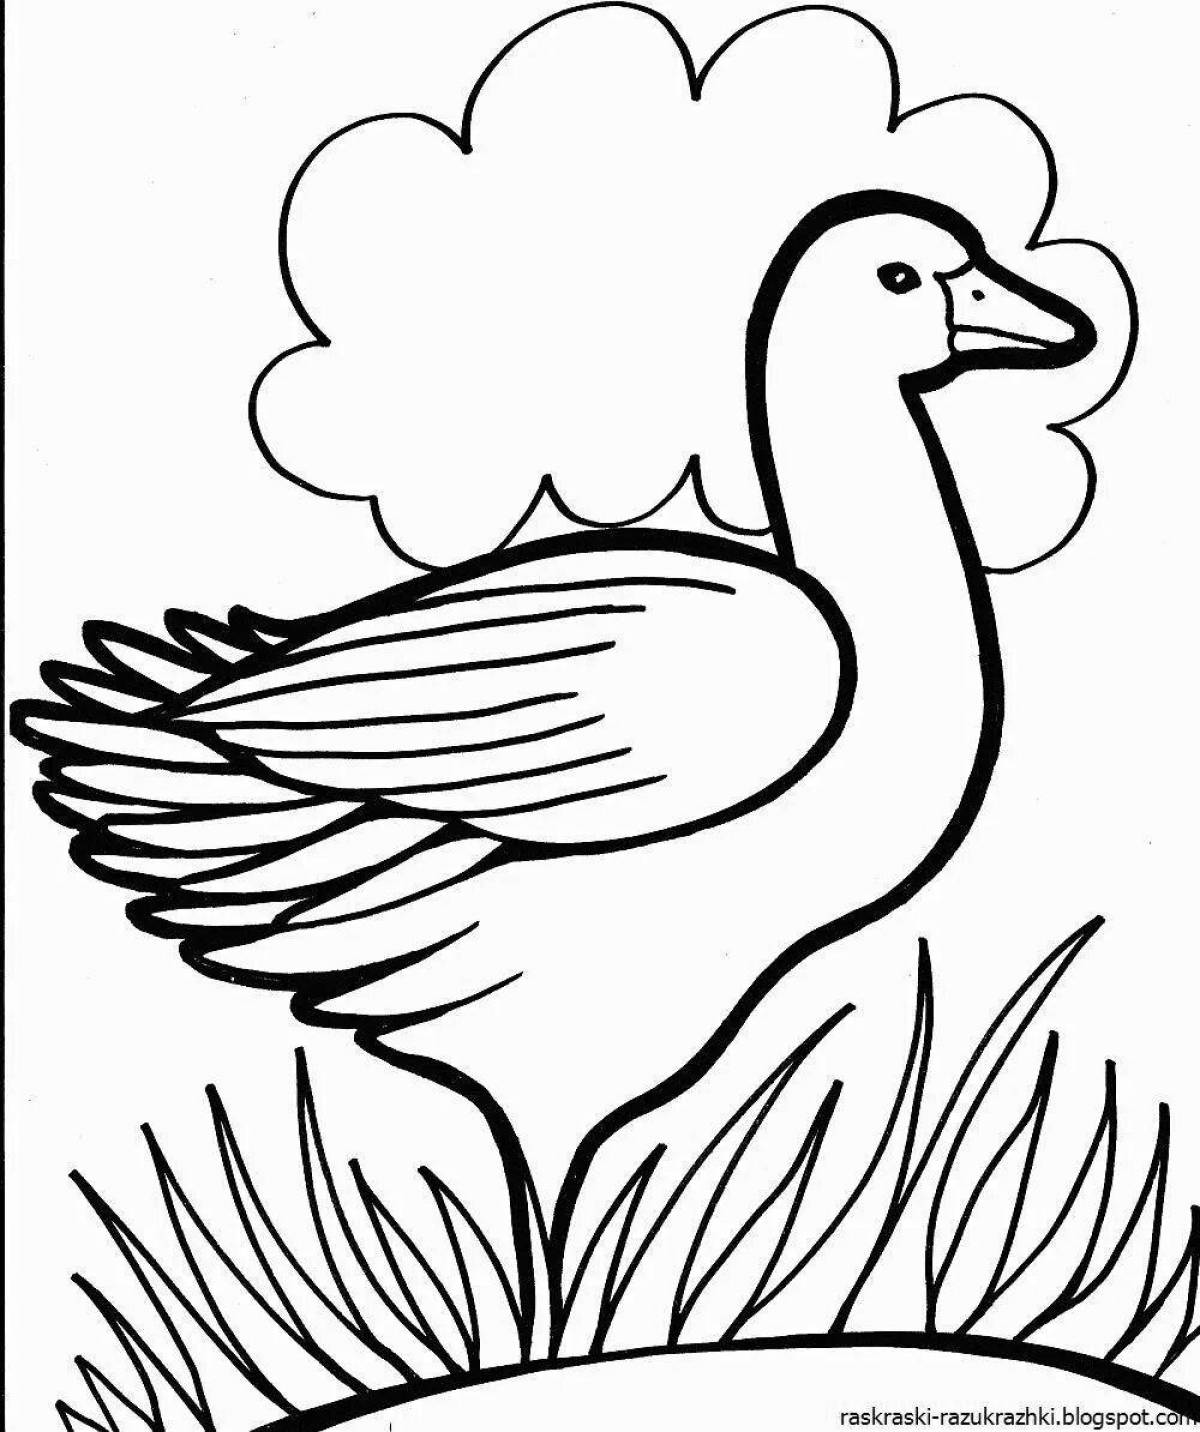 Fabulous coloring pages of migratory birds for kids